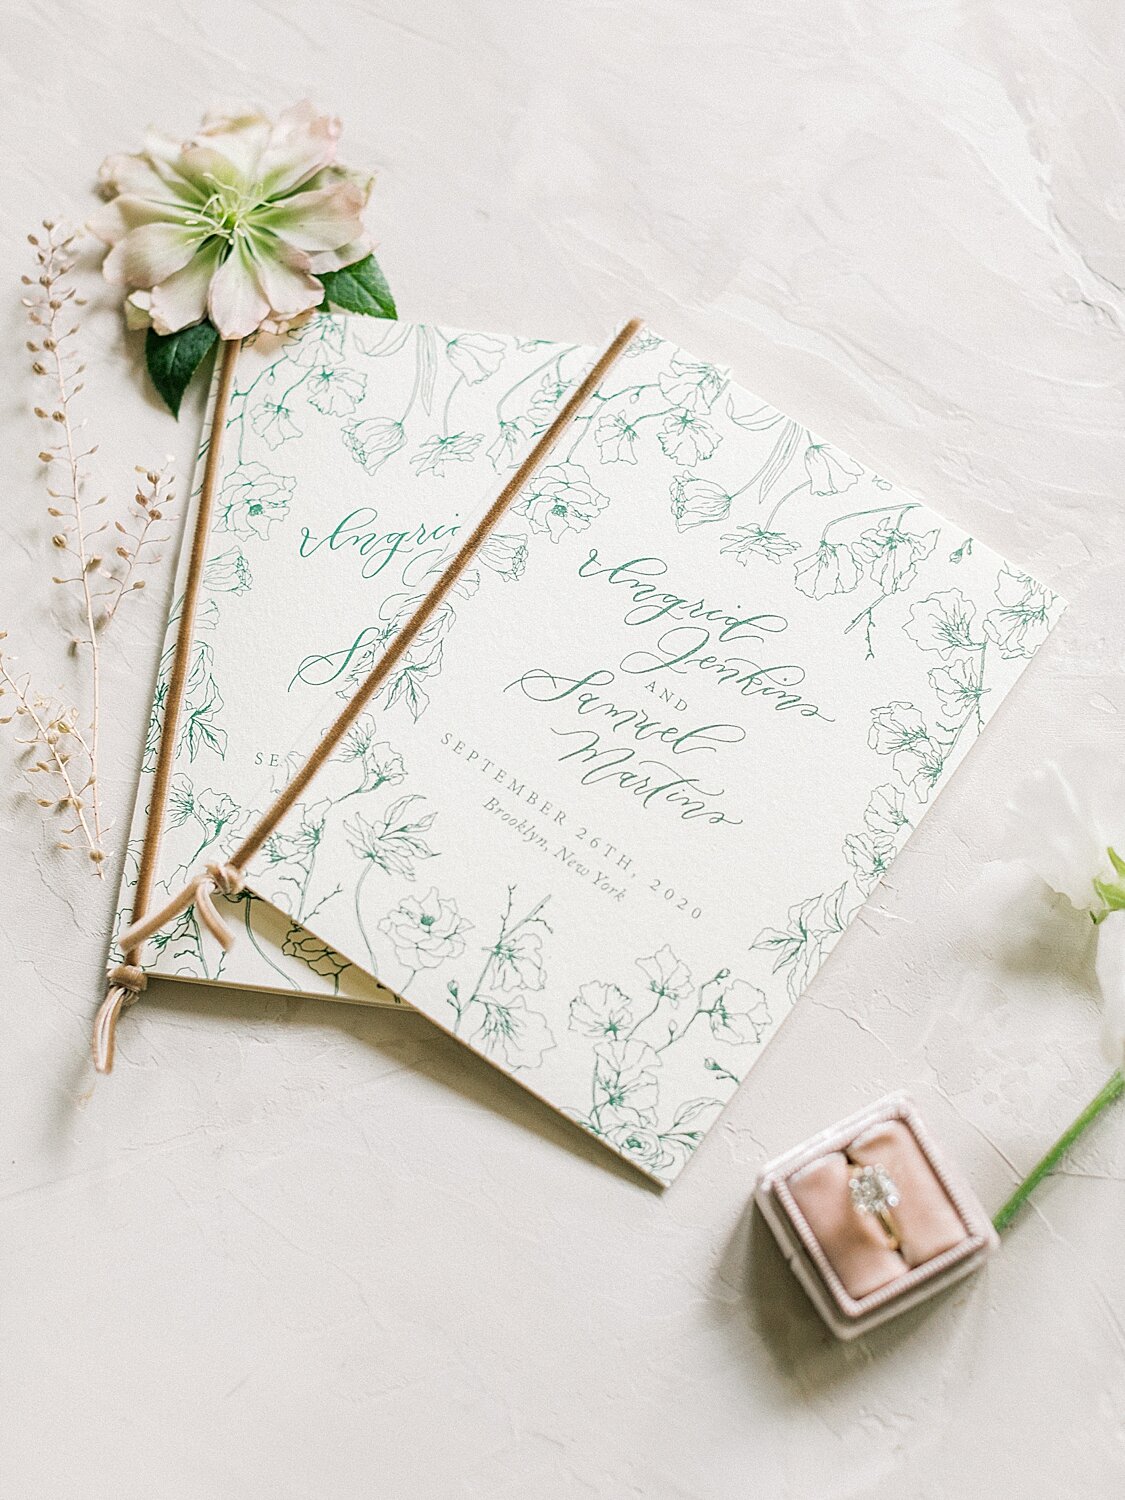 elegant wedding invitations with green details | Asher Gardner Photography | Intimate Ceremony in DUMBO New York